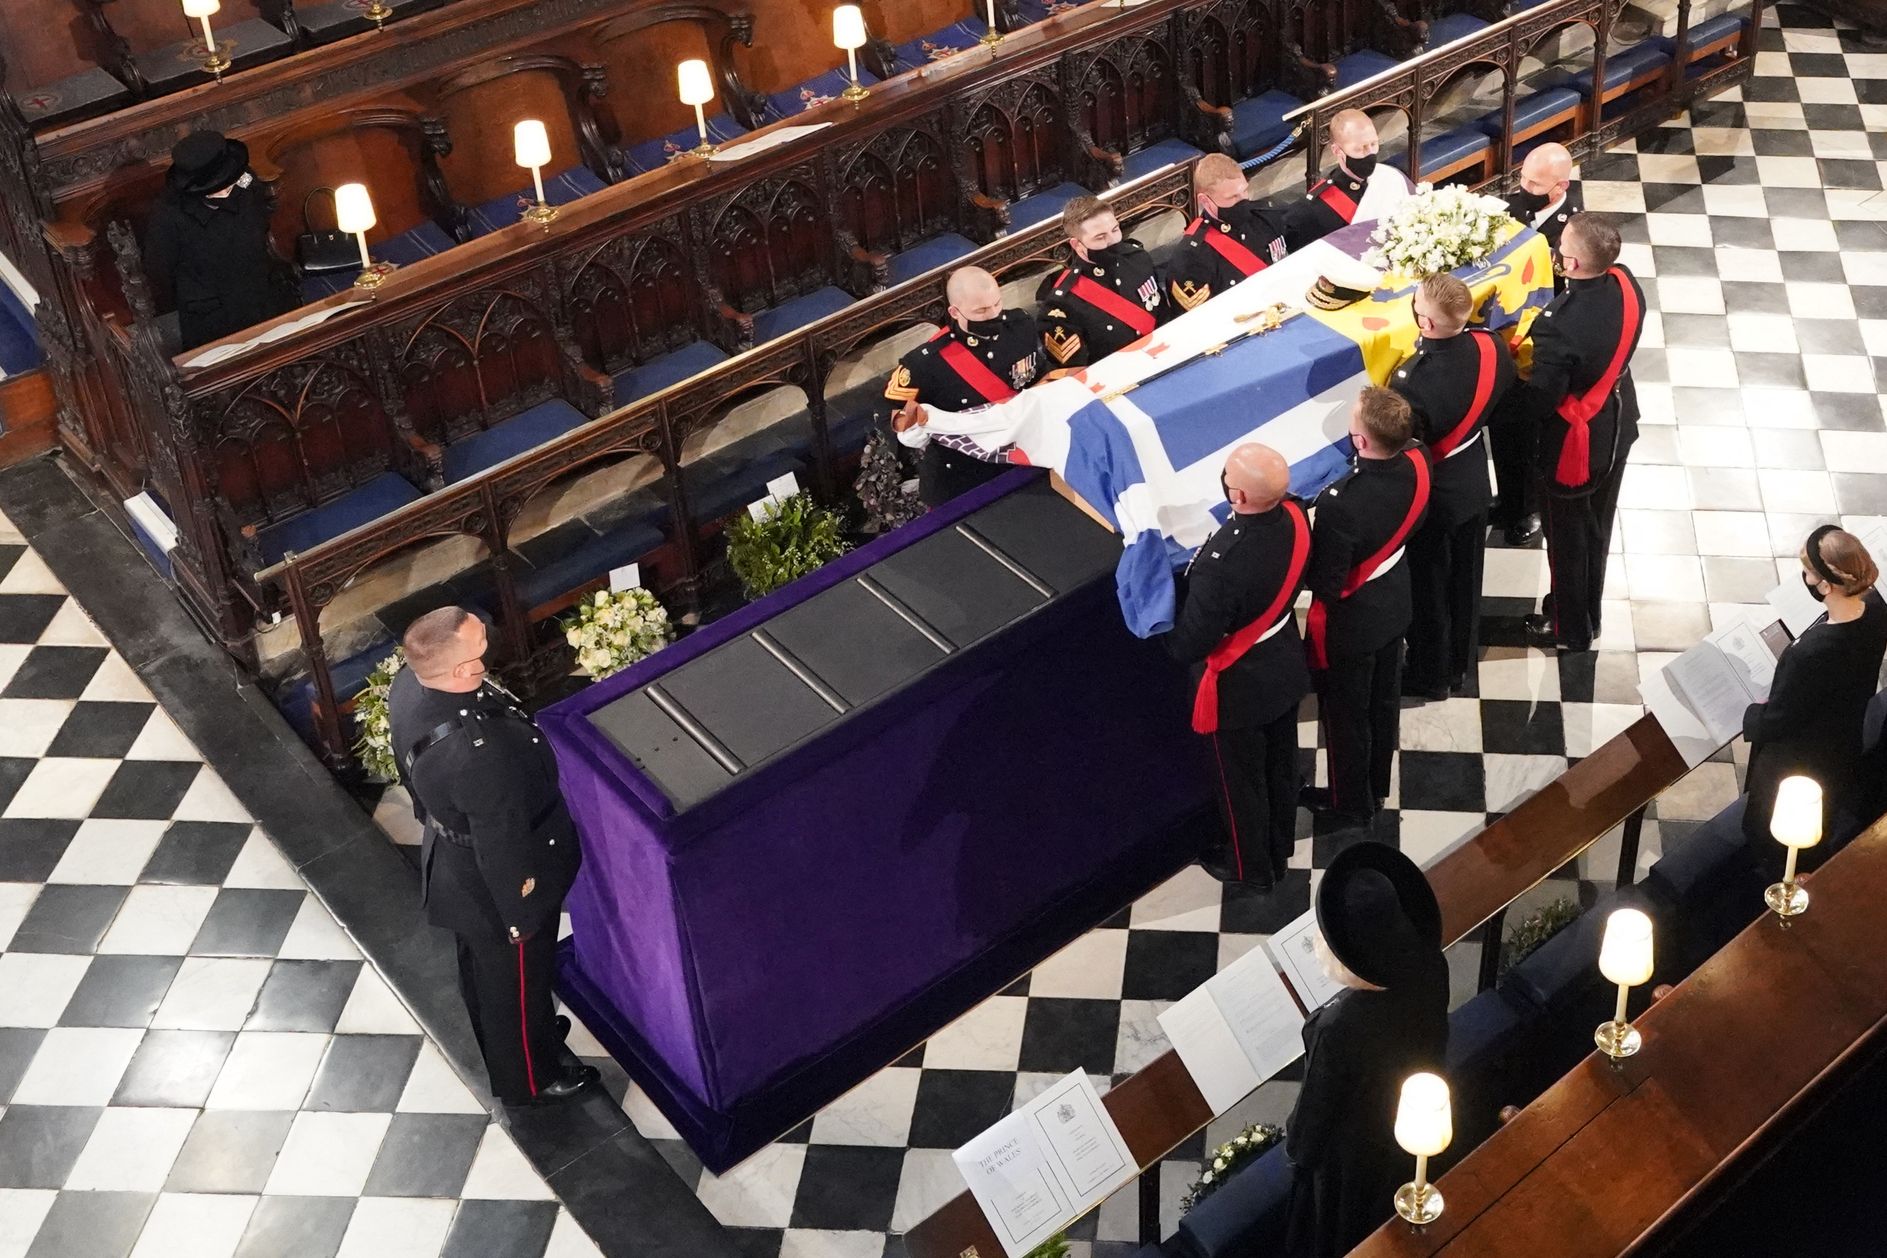 Picture of the coffin inside the church